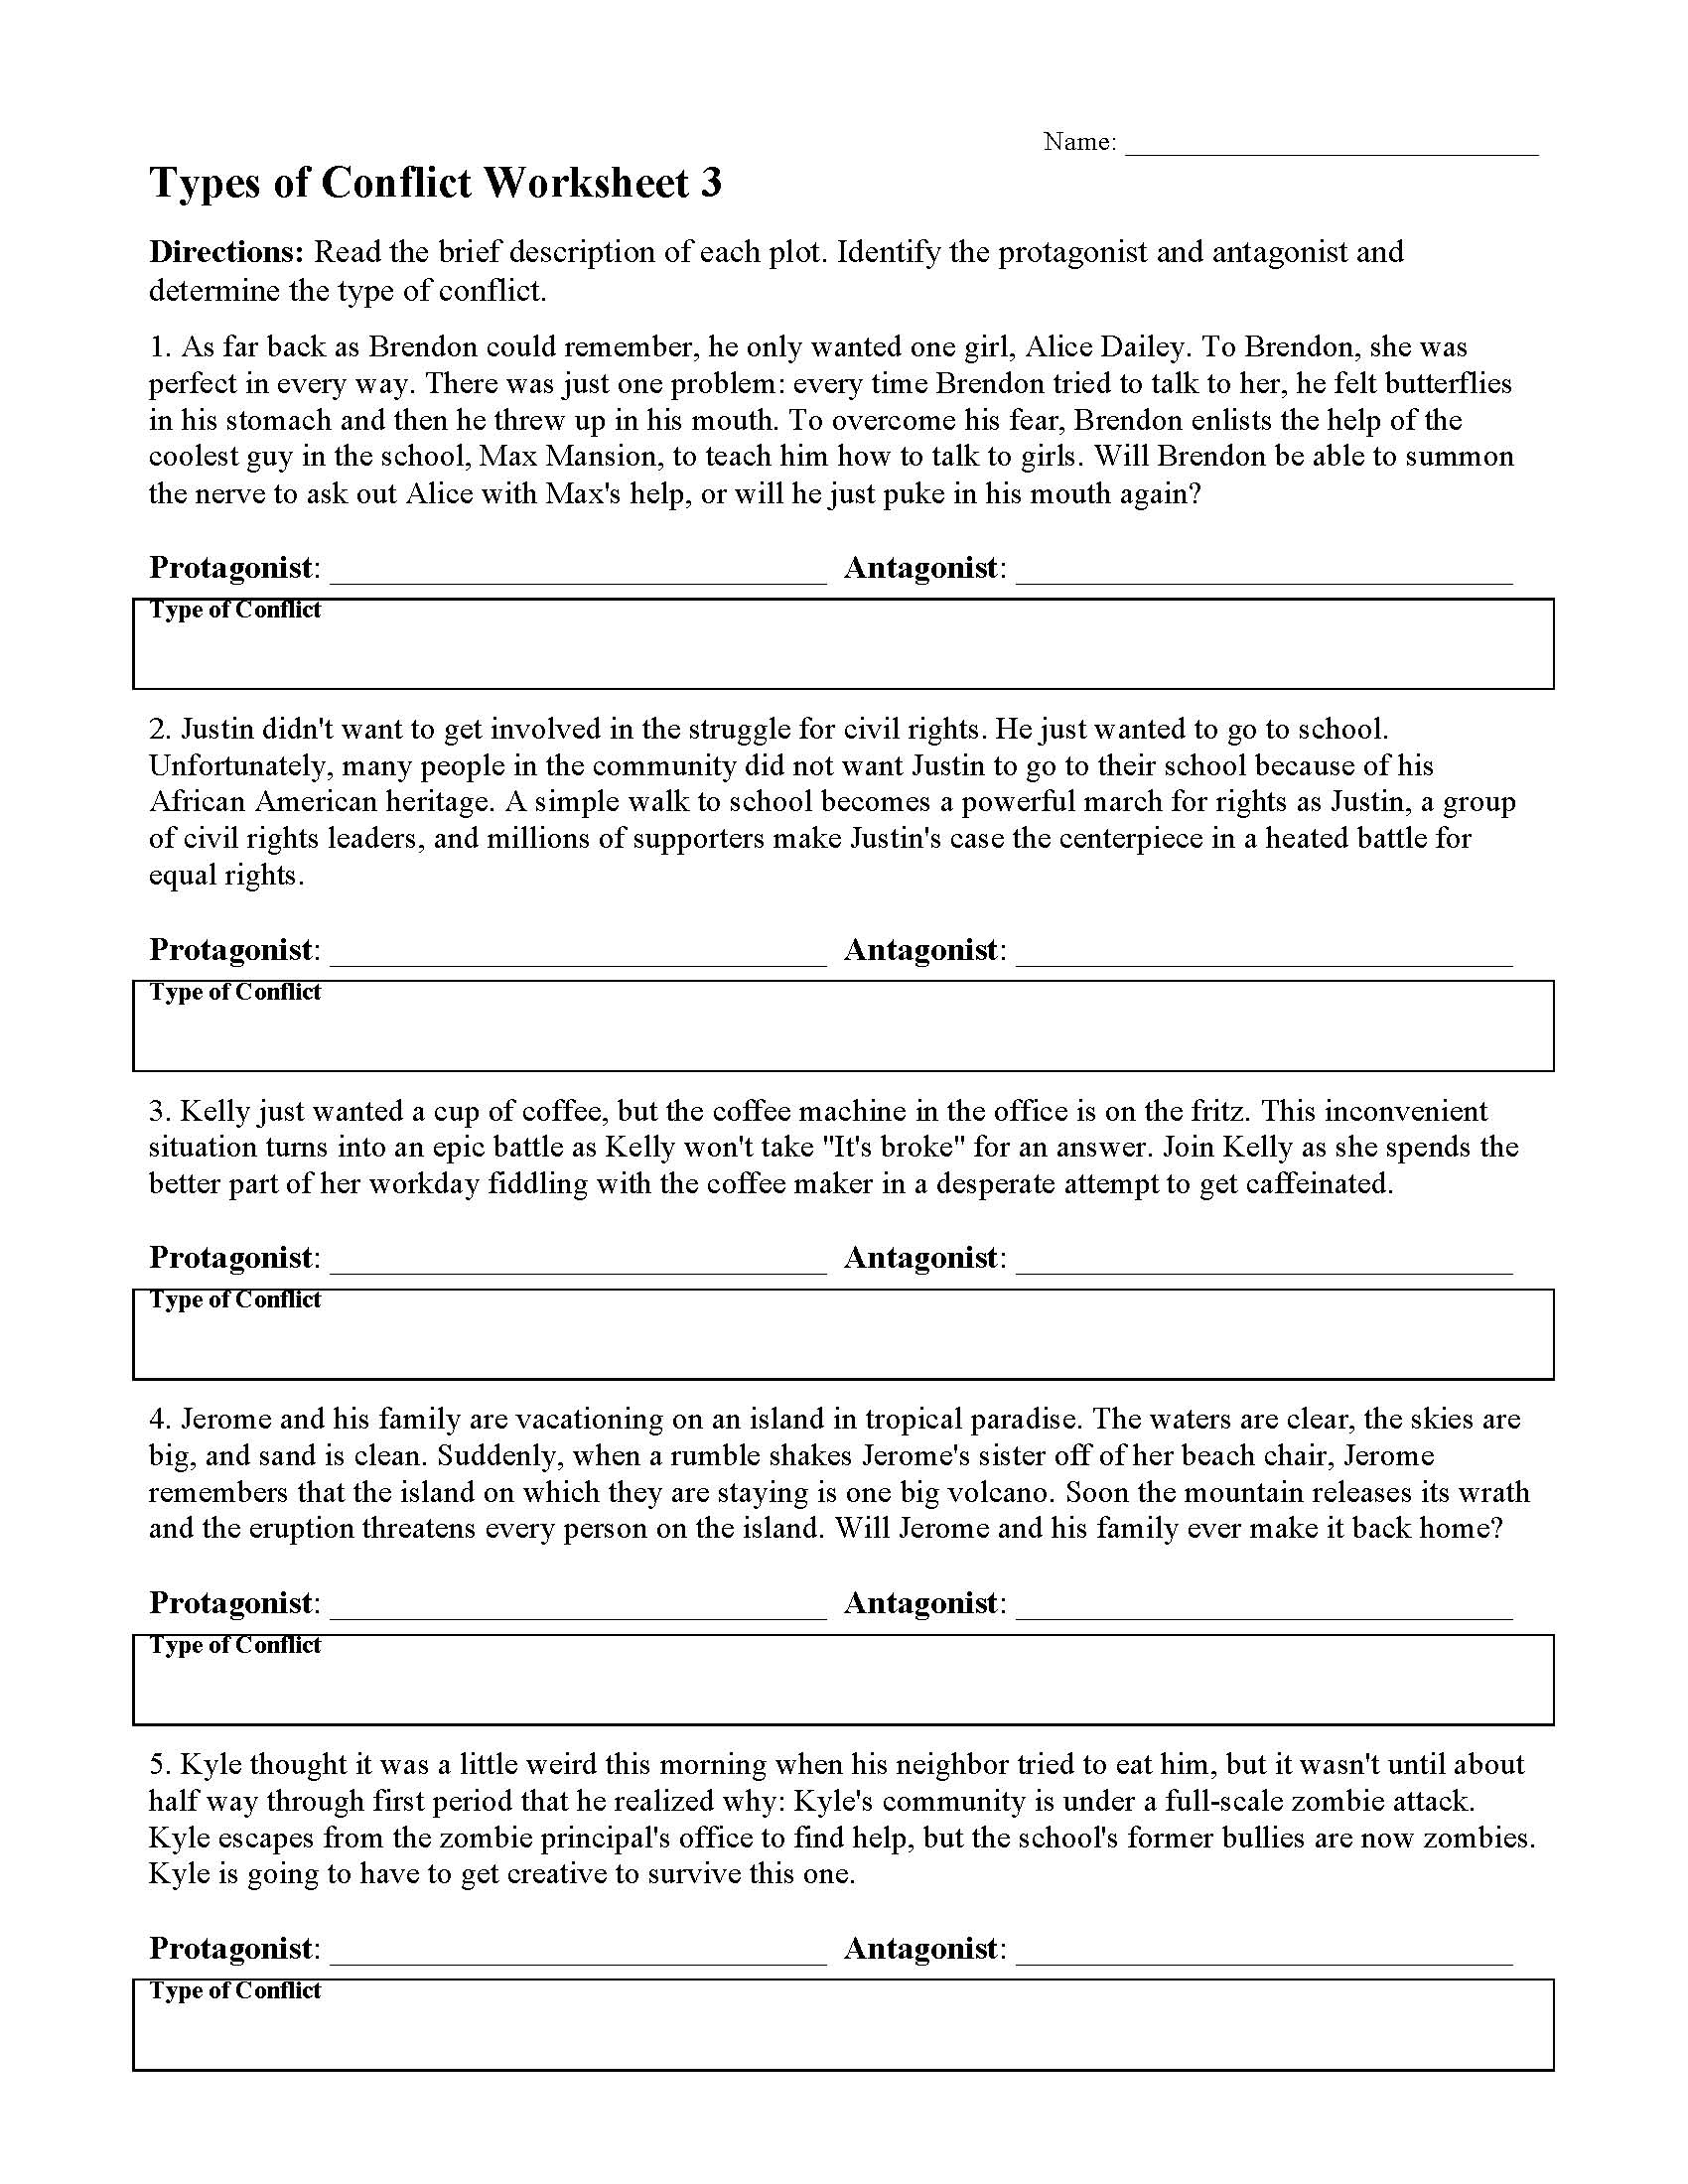 This is a preview image of Types of Conflict Worksheet 3. Click on it to enlarge it or view the source file.